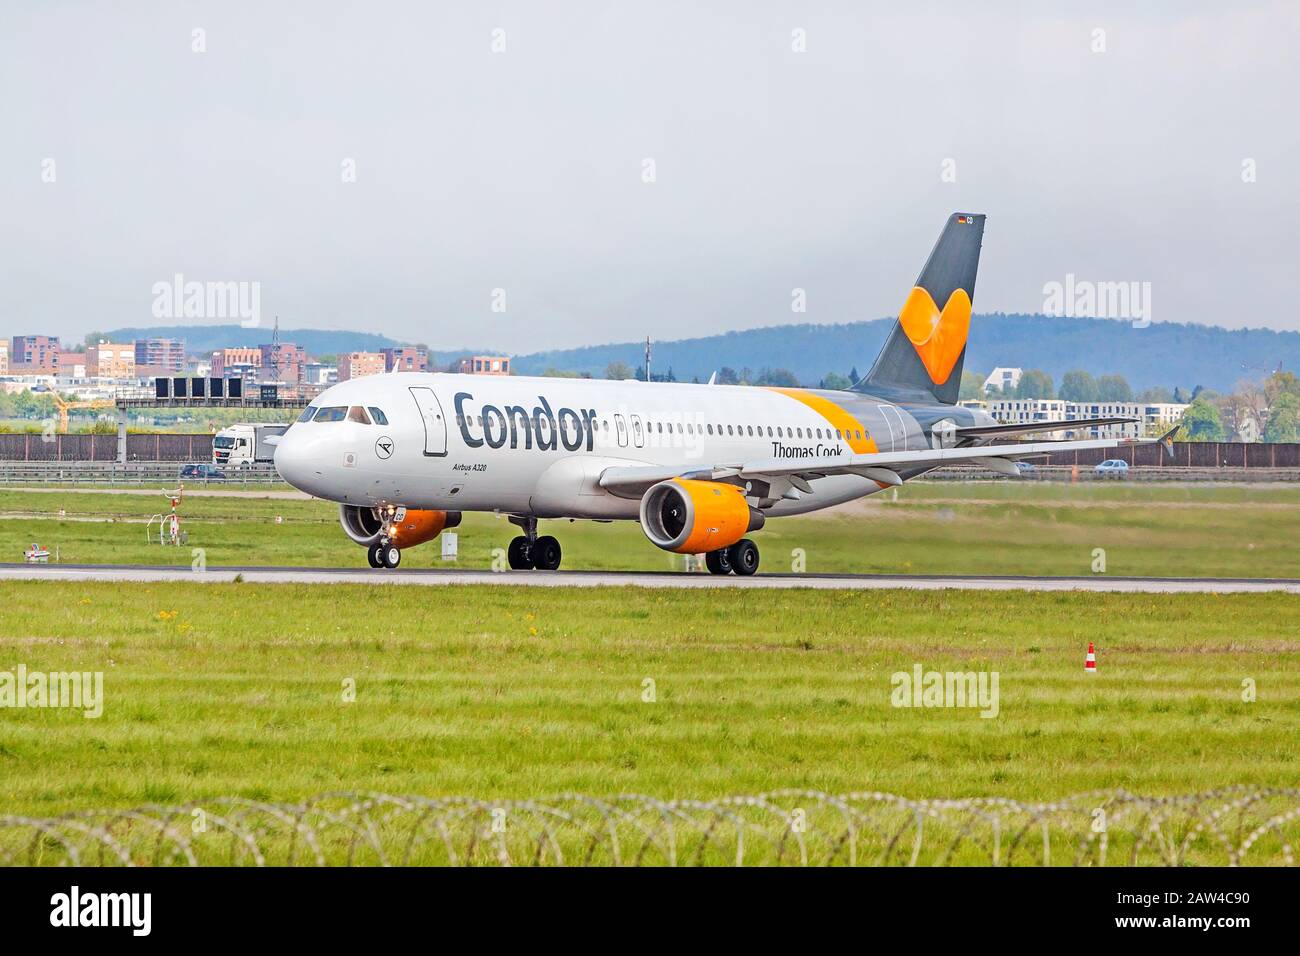 Stuttgart, Germany - April 29, 2017: Airbus airplane A320 from Condor at ground (airport Stuttgart) before takeoff - green meadow with fence in front Stock Photo